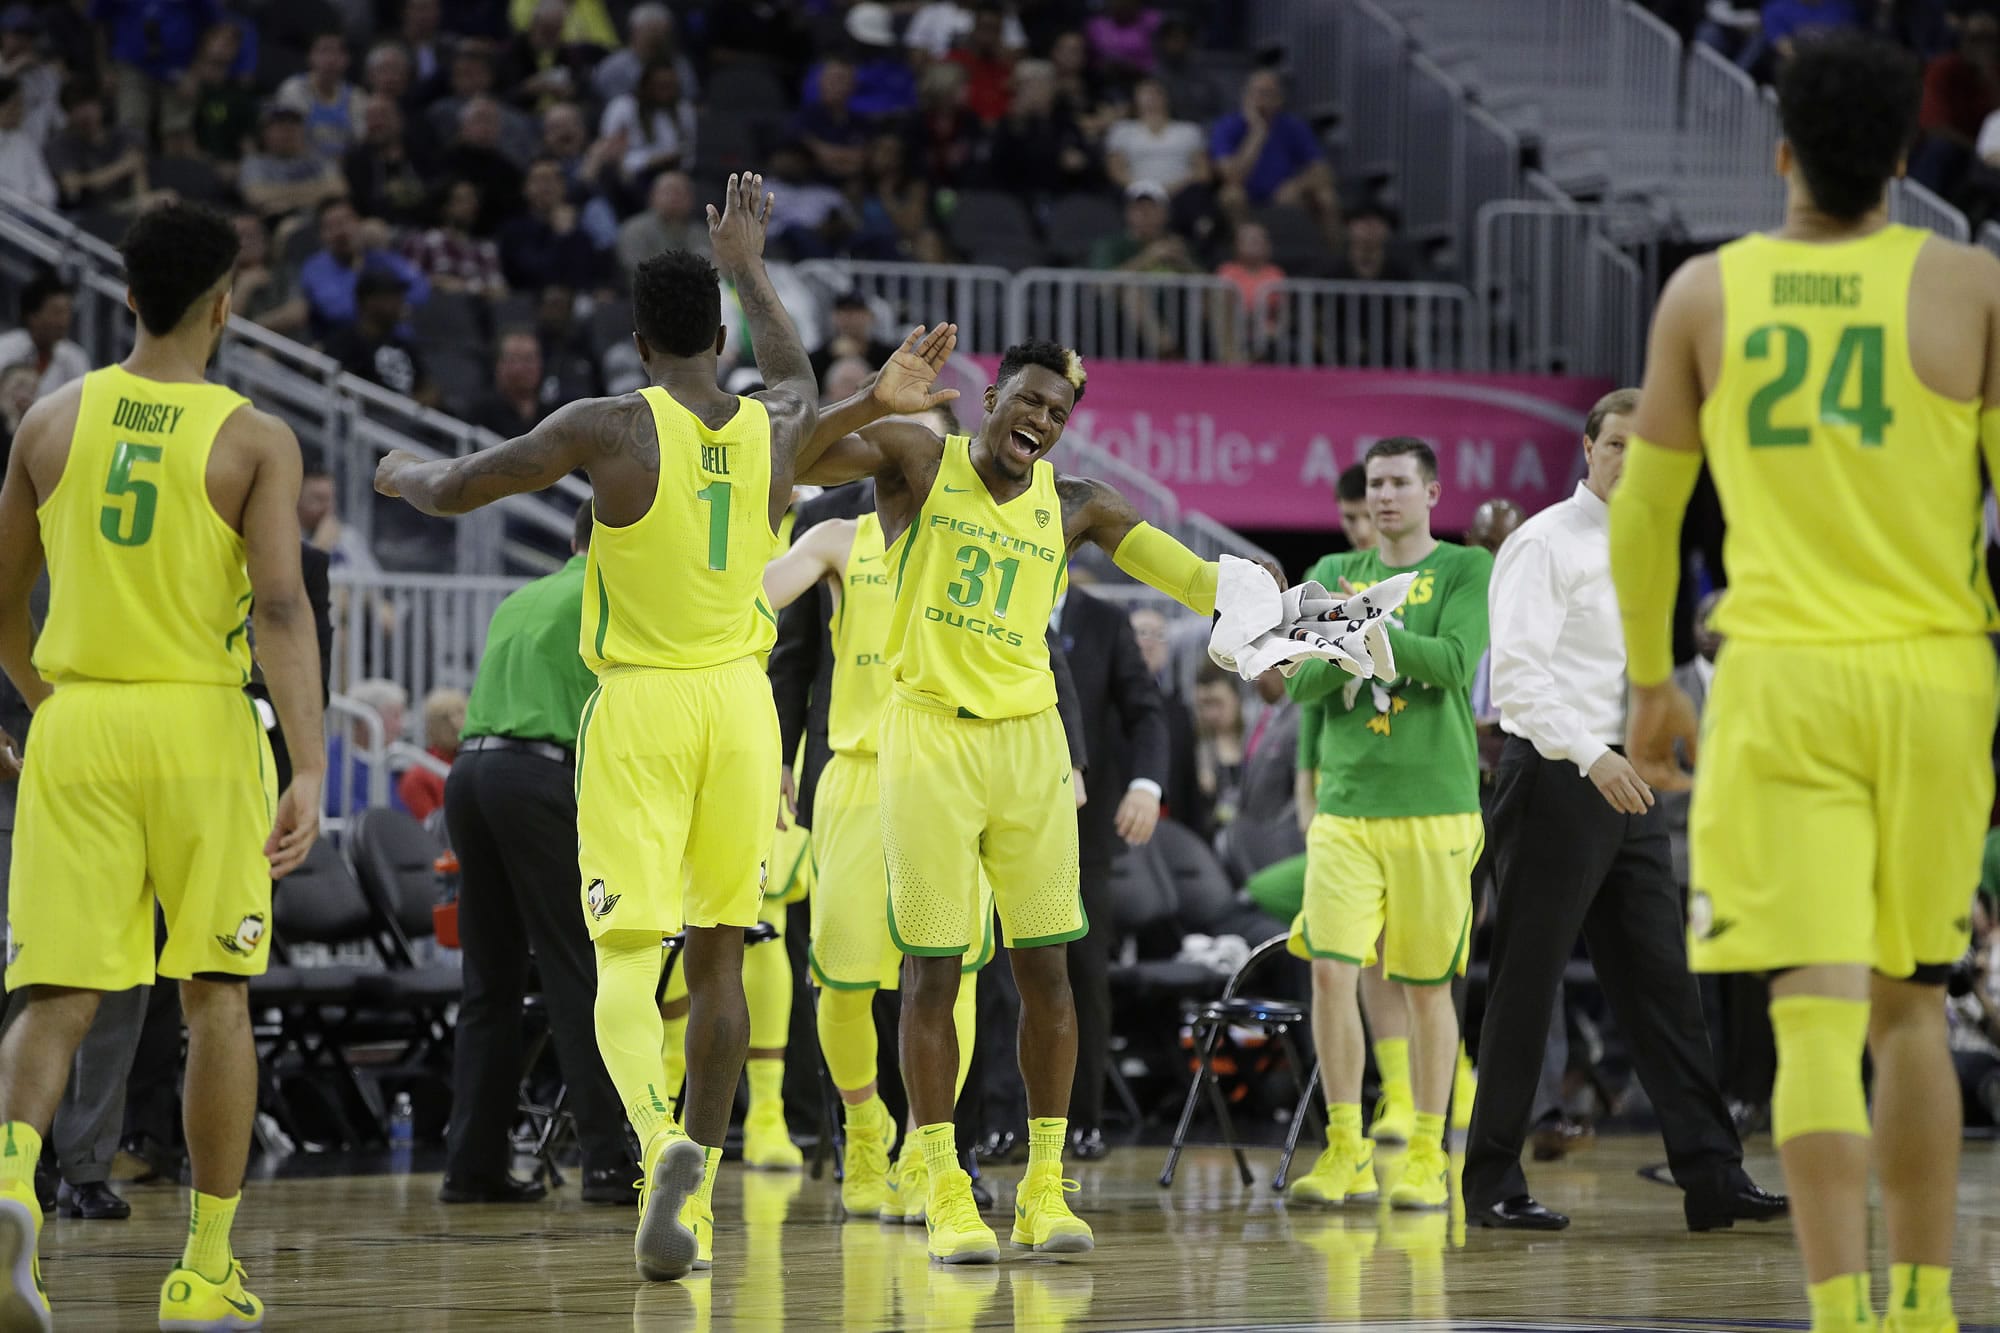 Oregon's Dylan Ennis (31) and Jordan Bell (1) celebrate after a play against California during the second half of an NCAA college basketball game in the semifinals of the Pac-12 men's tournament Friday, March 10, 2017, in Las Vegas. Oregon won 73-65.